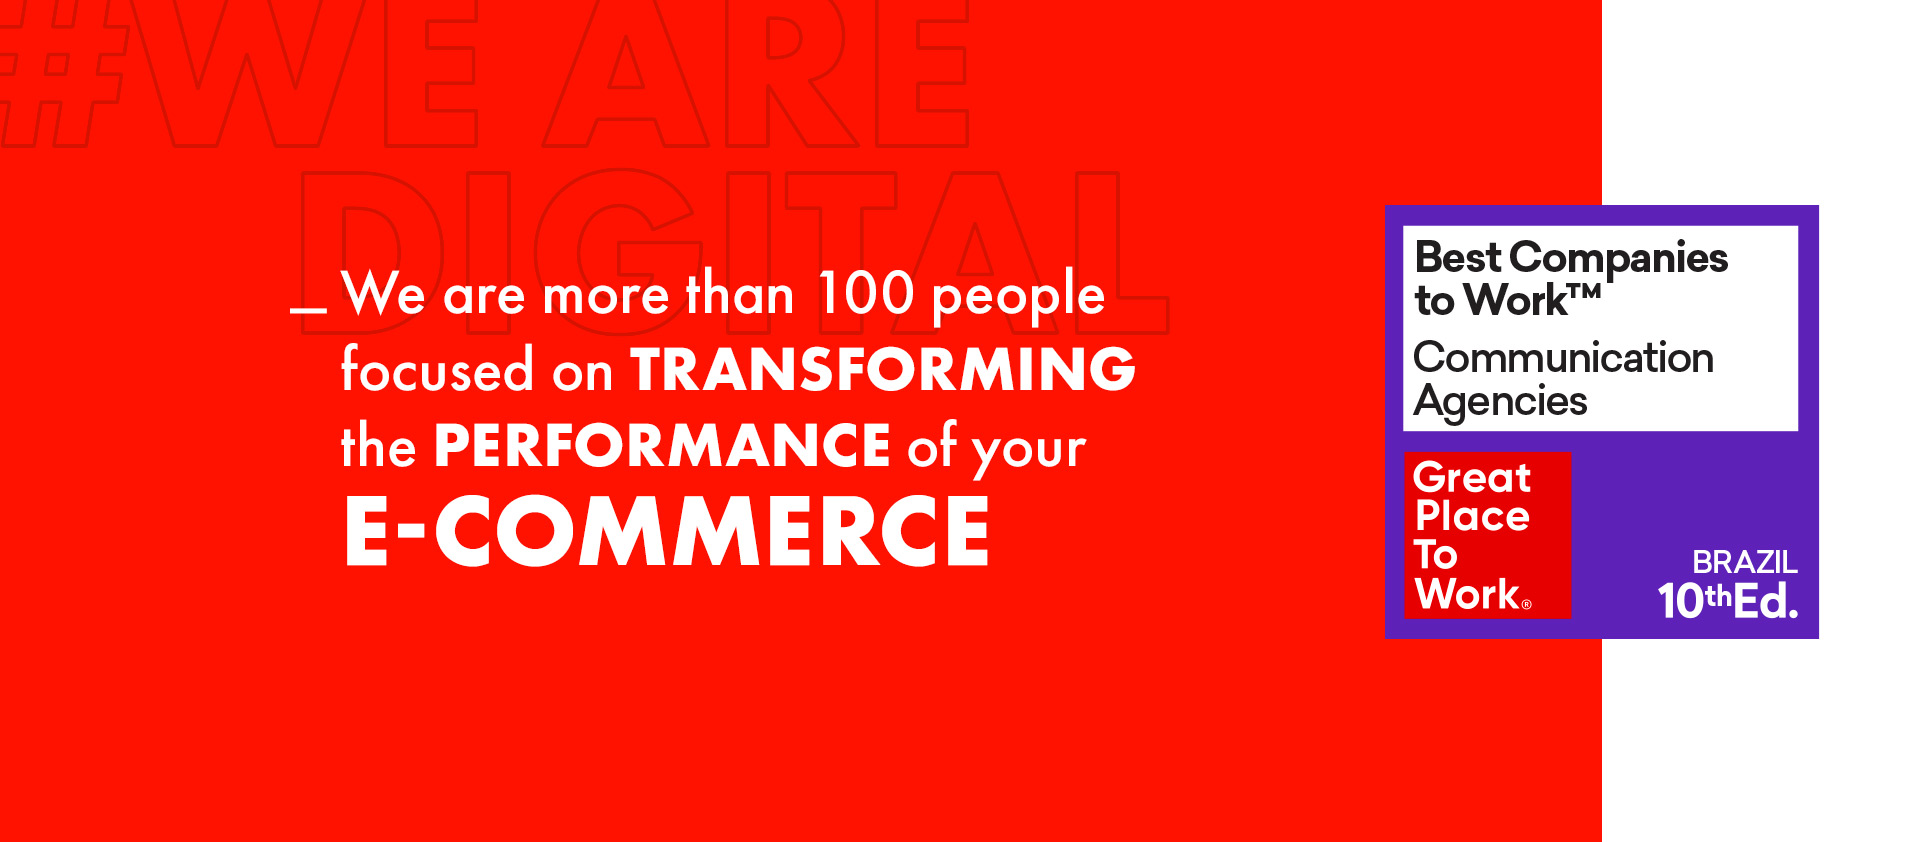 FG Agency home banner with red background and white spelling with the phrase "We are more than 100 people focused on TRANSFORMING the PERFORMANCE of your E-COMMERCE". The image also has the GPTW seal conquered by the Agency in 2022.